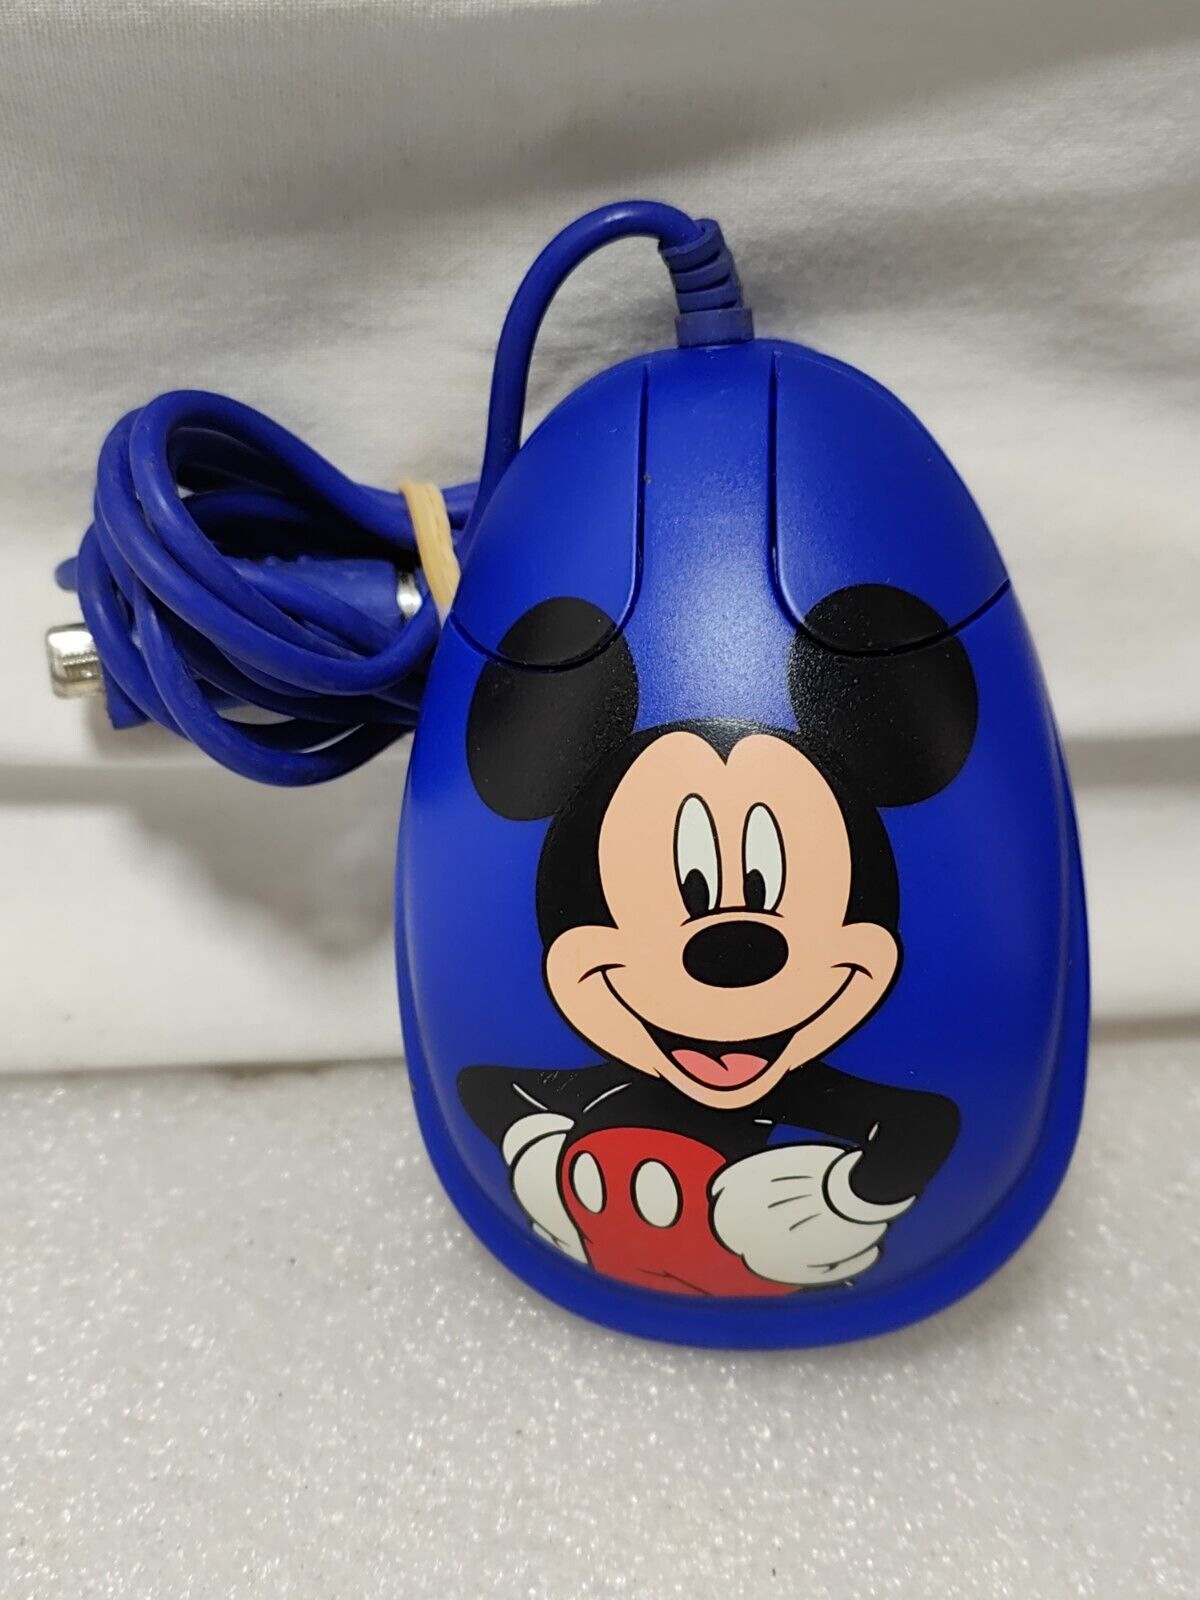 Rare Disney Mickey Mouse PS/2 Computer Ball Mouse Vintage